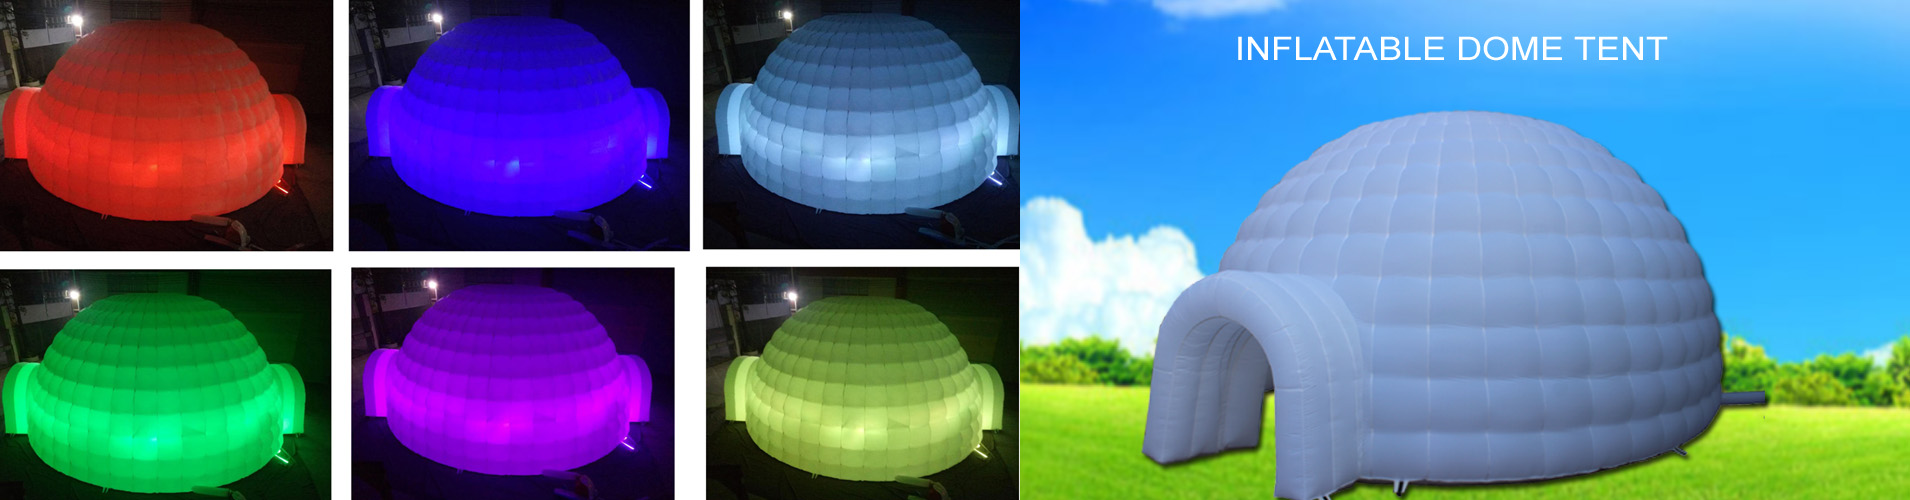 JOY inflatable building inflatable transparent tent from China for outdoor-1